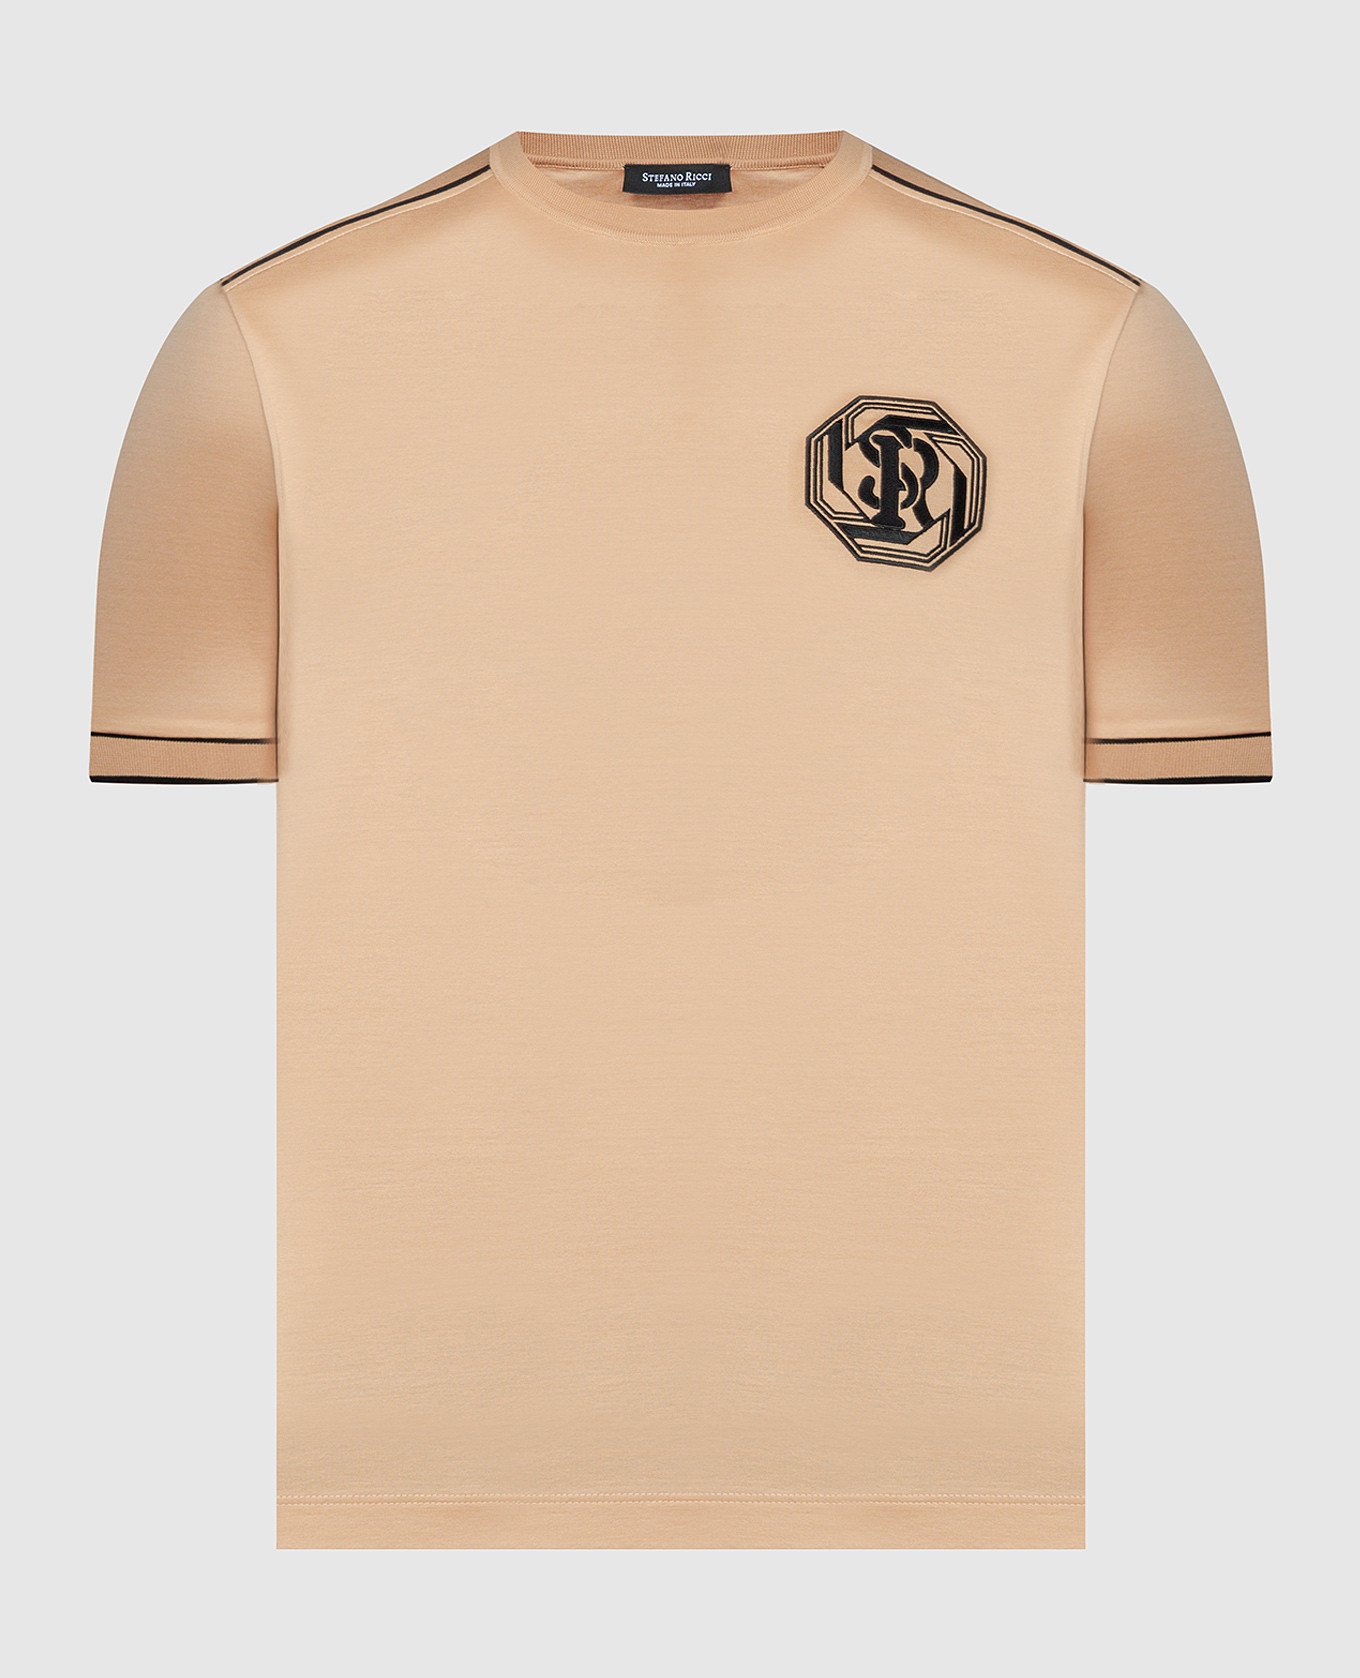 Brown t-shirt with monogram logo embroidery